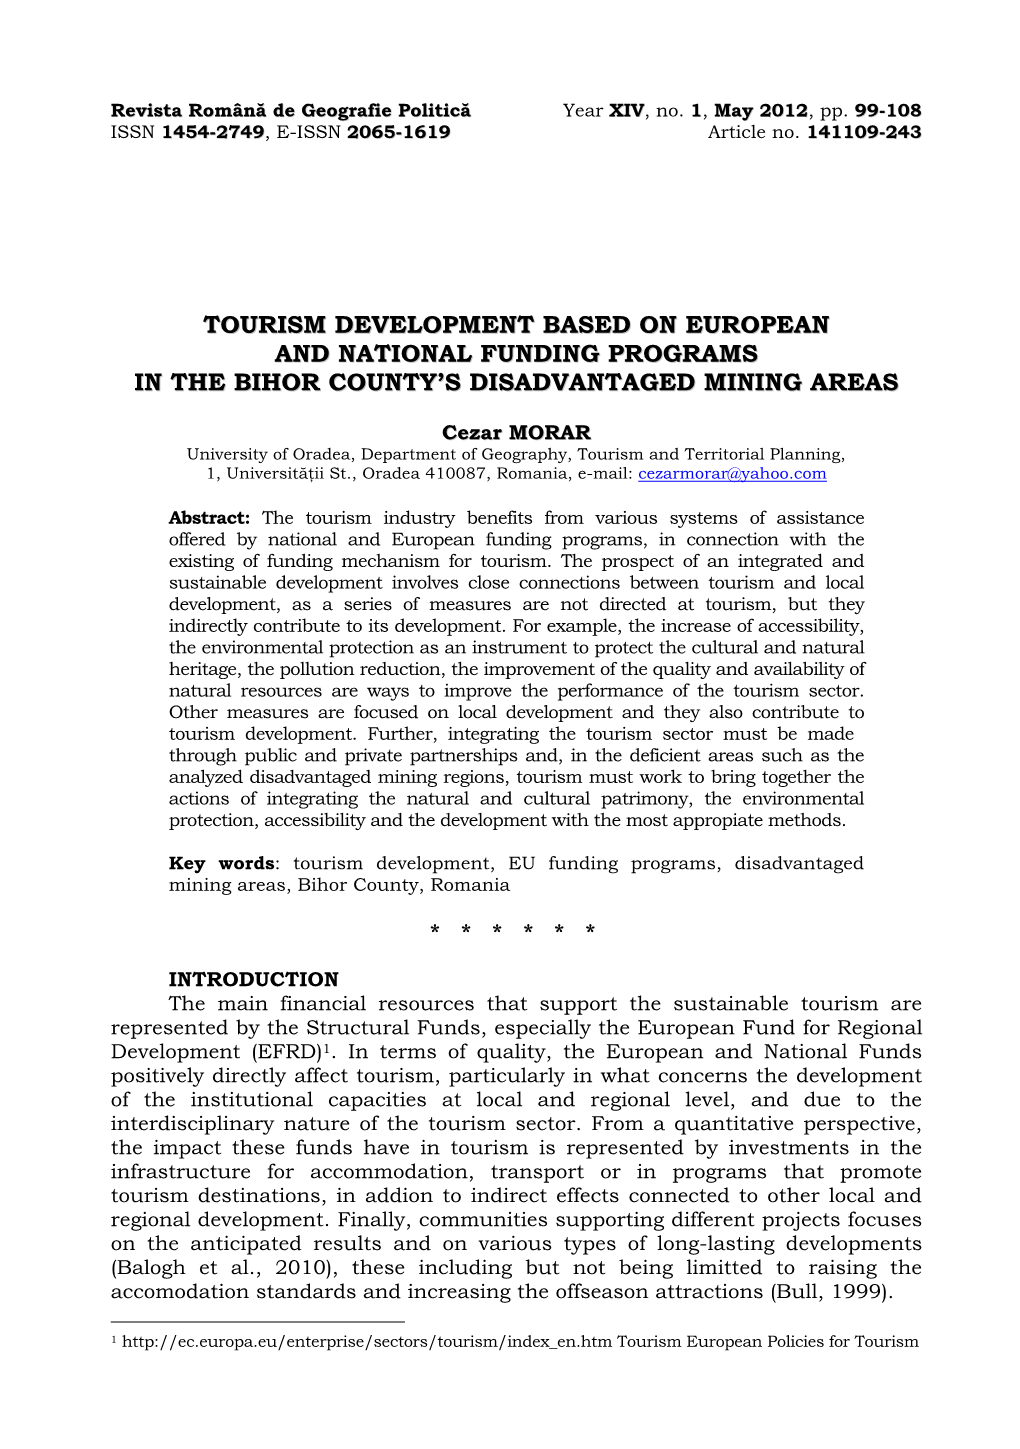 Tourism Development Based on European and National Funding Programs in the Bihor County’S Disadvantaged Mining Areas